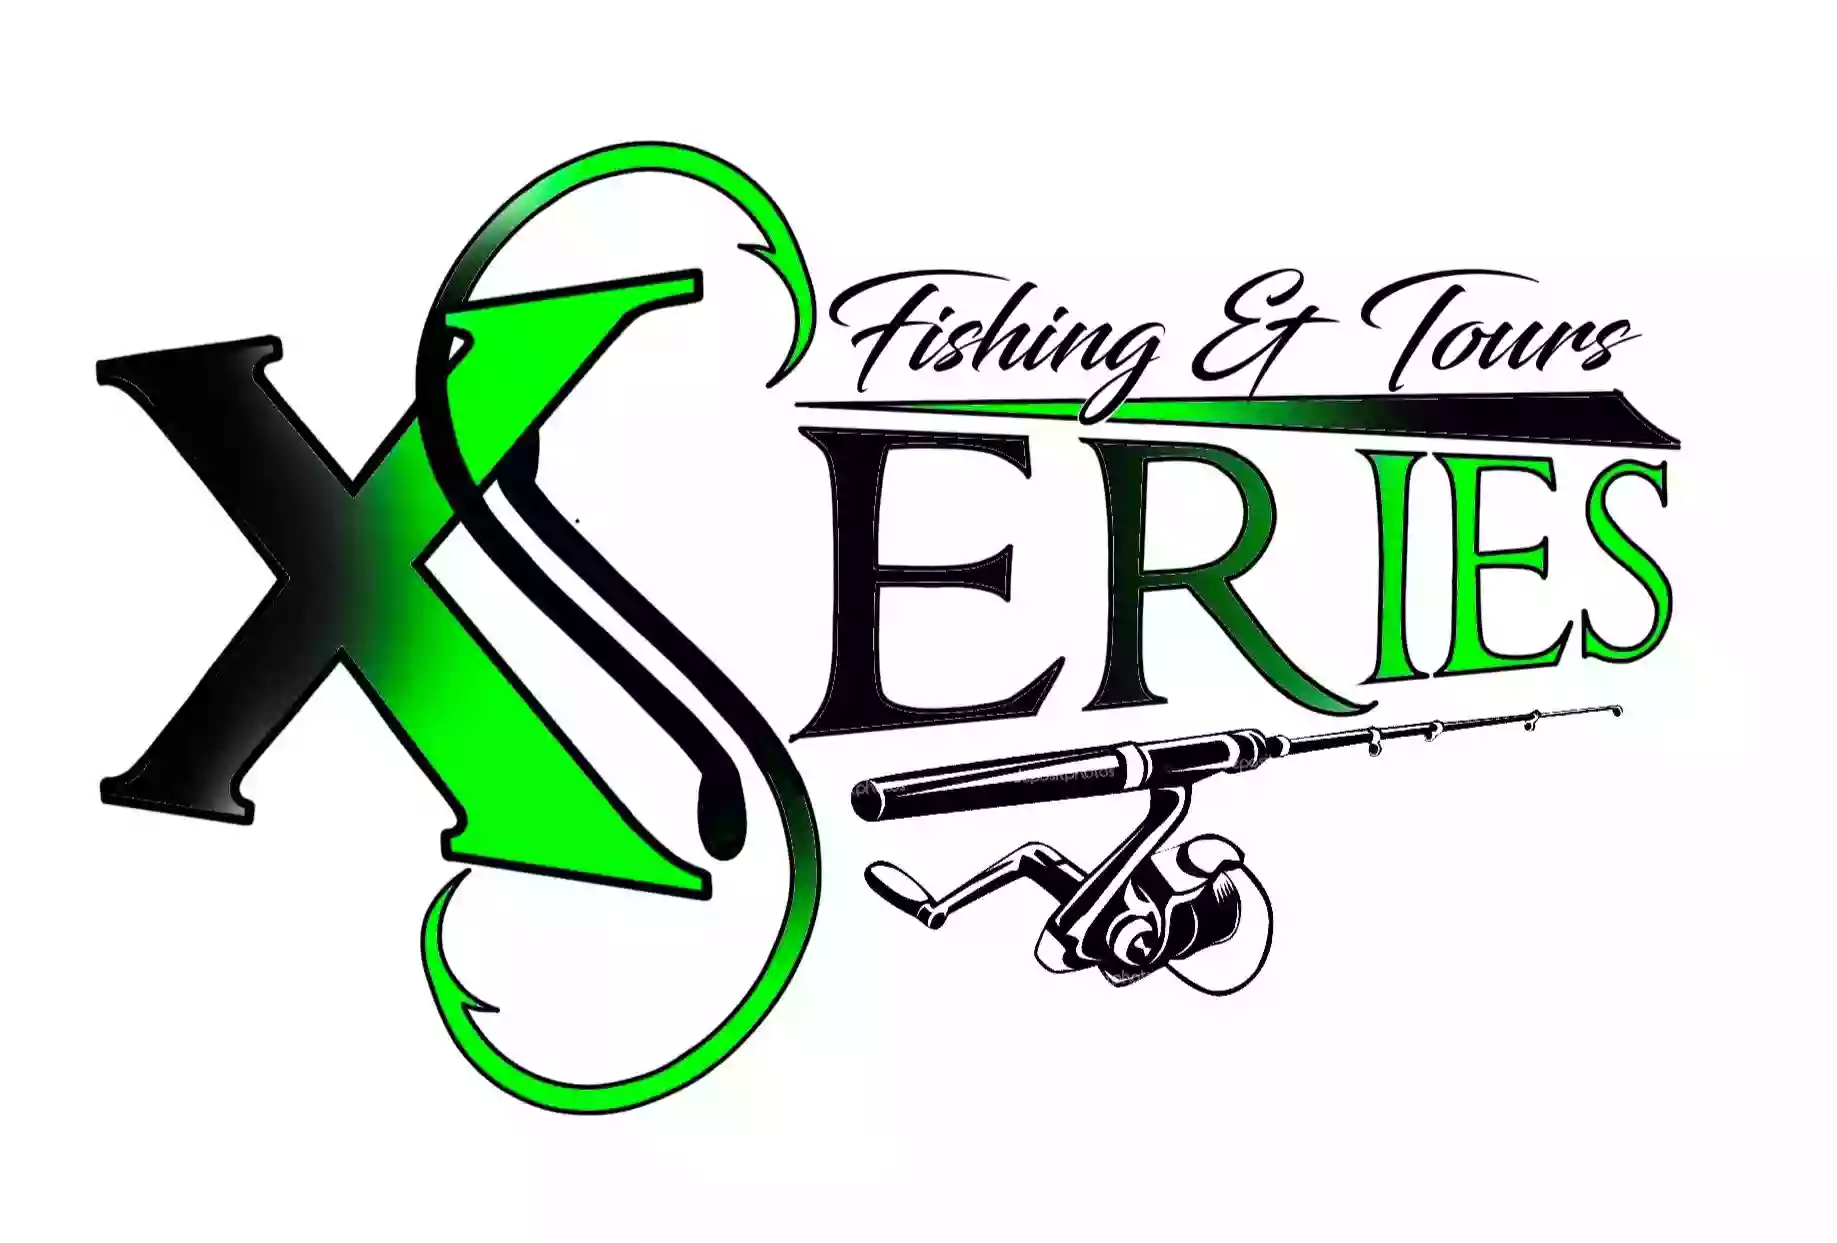 X Series Fishing and Tours • Fishing Guide, Millwood Lake, AR